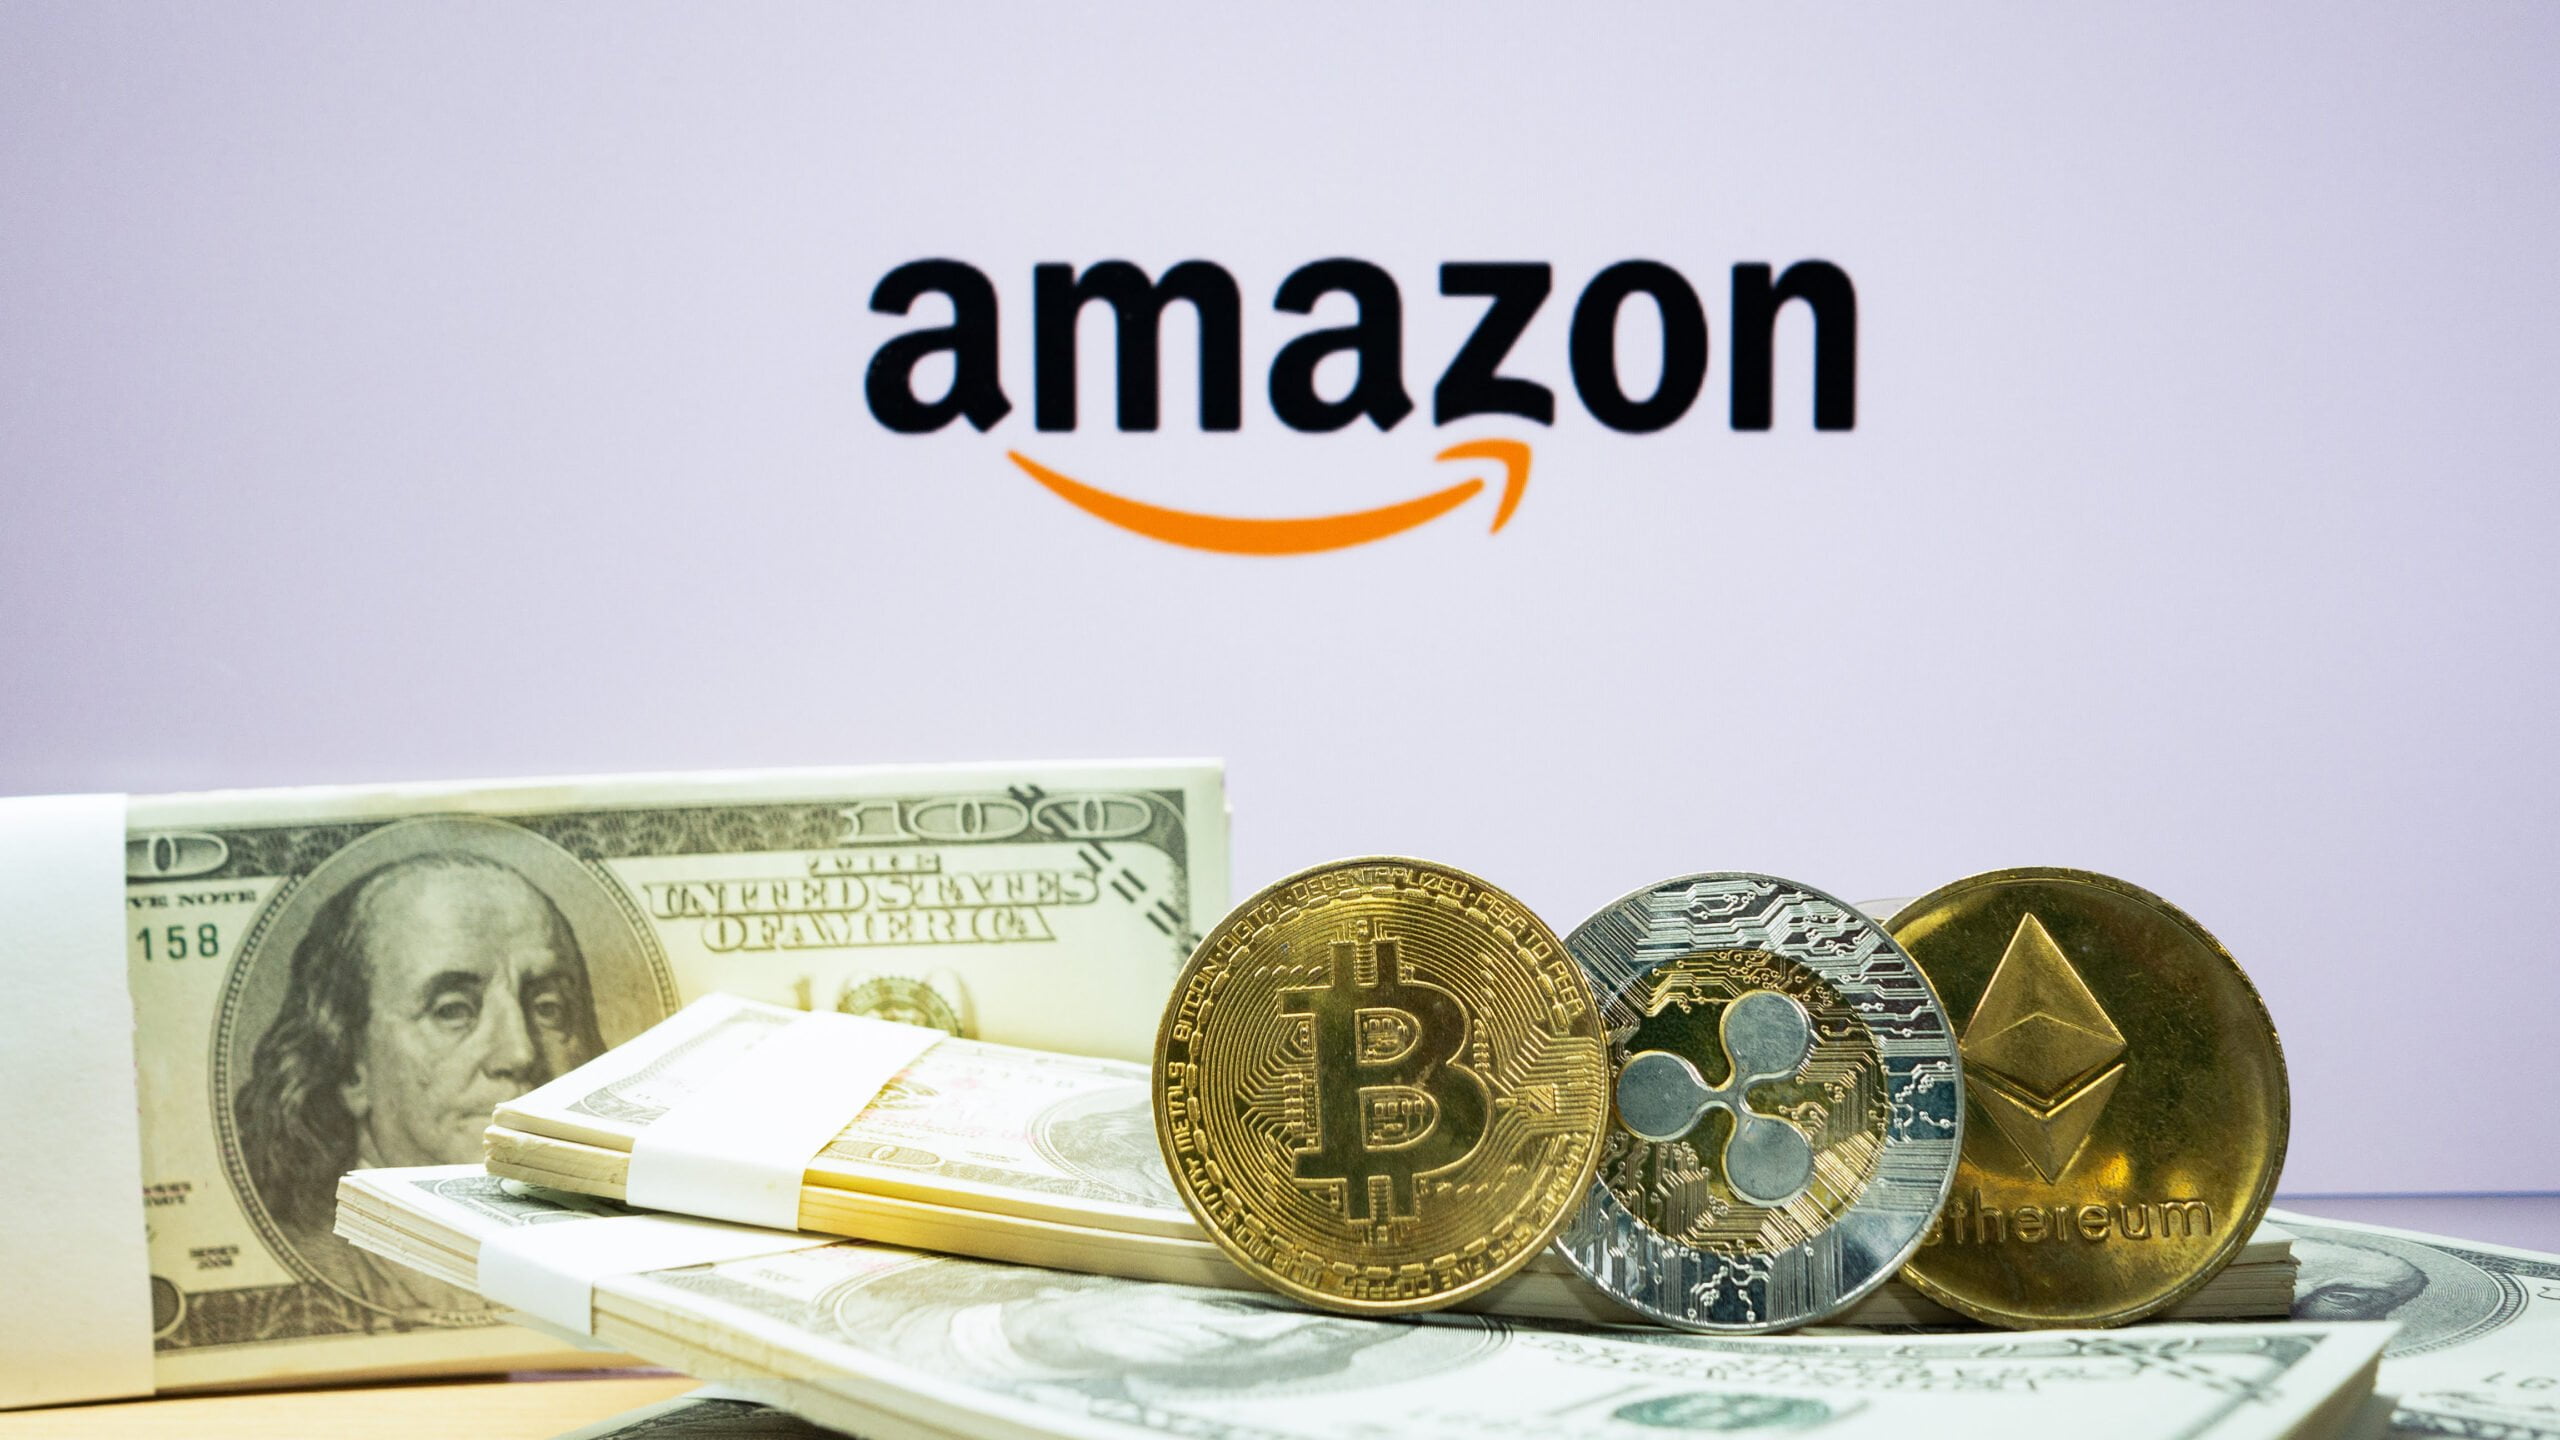 Amazon not interested in Crypto but may allow NFTs trade: Amazon CEO 5